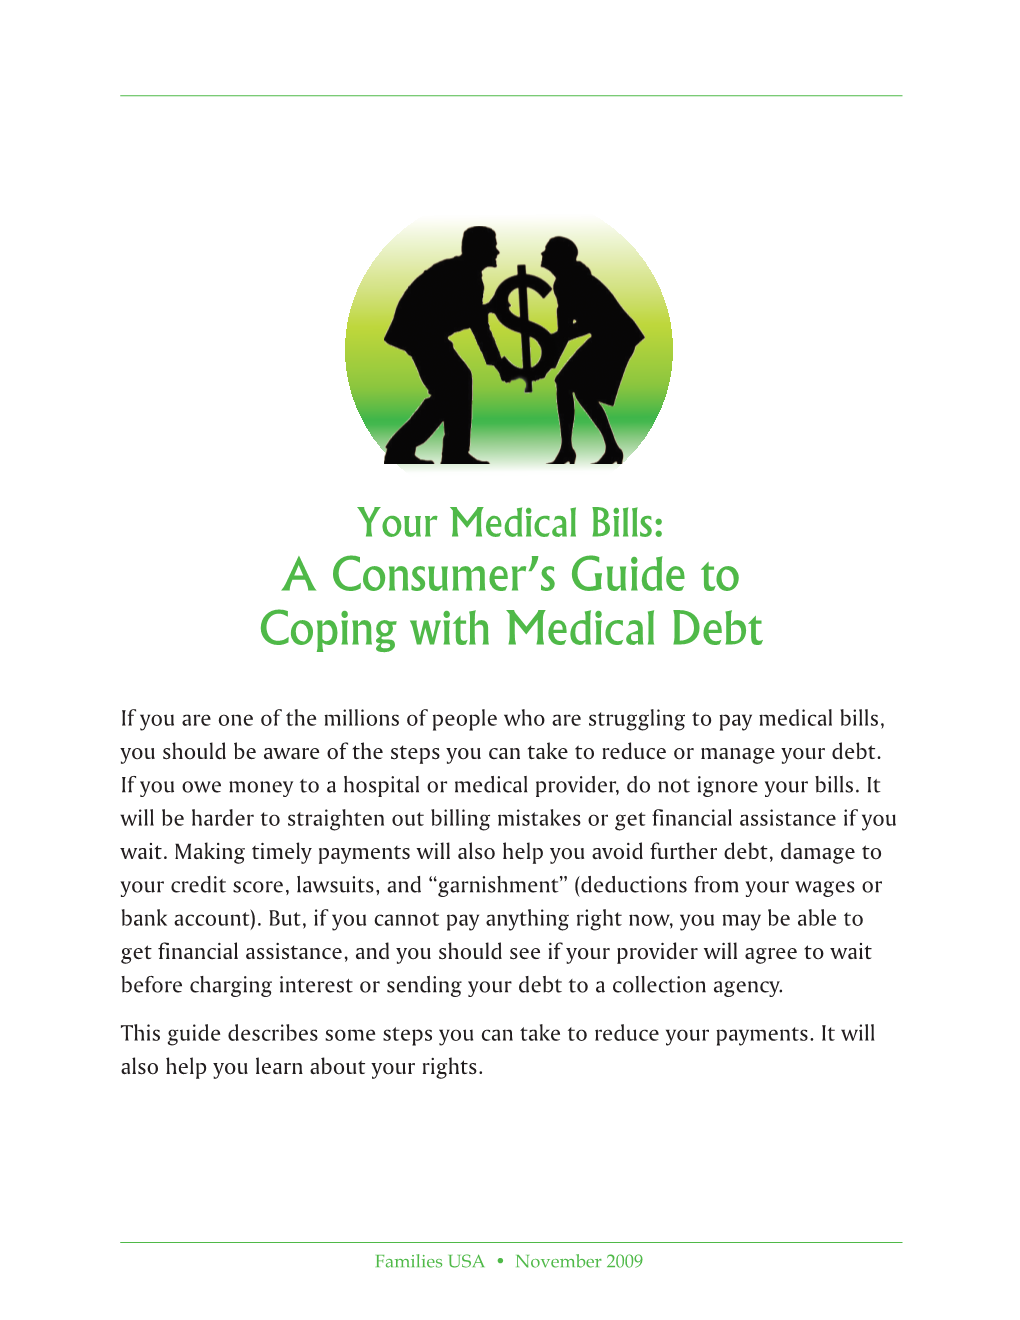 A Consumer's Guide to Coping with Medical Debt (PDF)